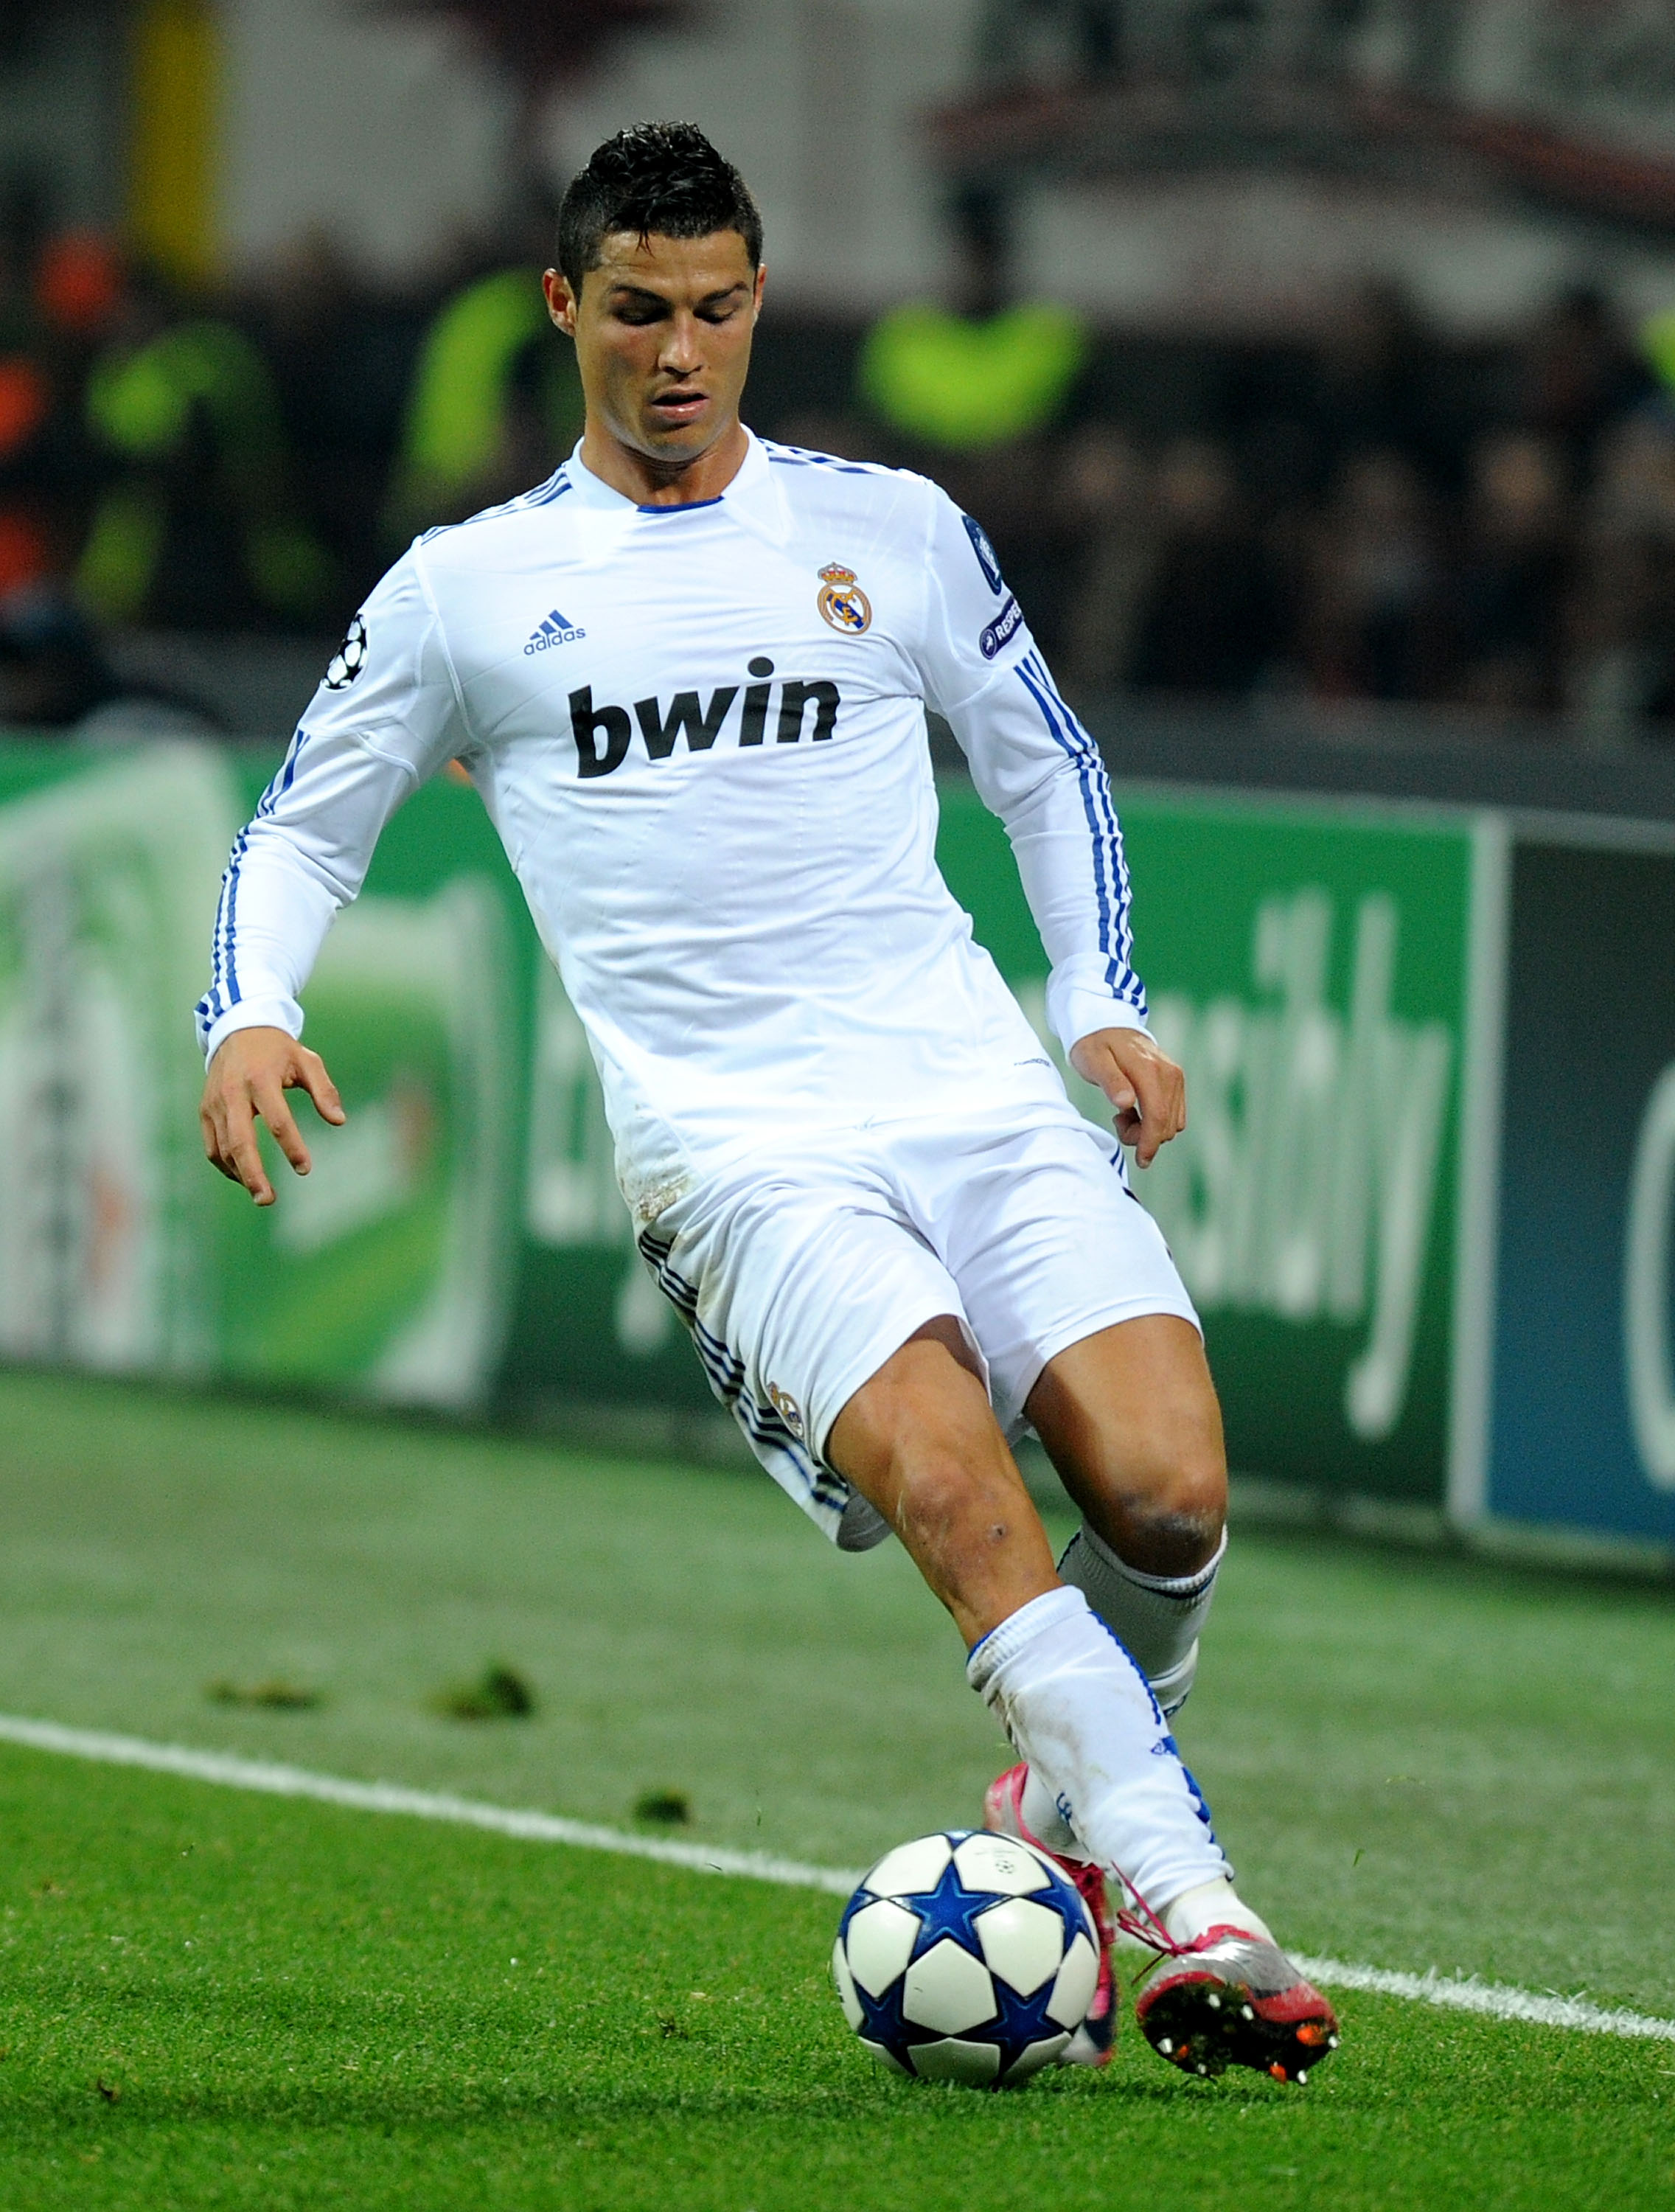 MILAN, ITALY - NOVEMBER 03:  Cristiano Ronaldo of Real Madrid in action during the UEFA Champions League Group G match between AC Milan and Real Madrid at Stadio Giuseppe Meazza on November 3, 2010 in Milan, Italy.  (Photo by Massimo Cebrelli/Getty Images